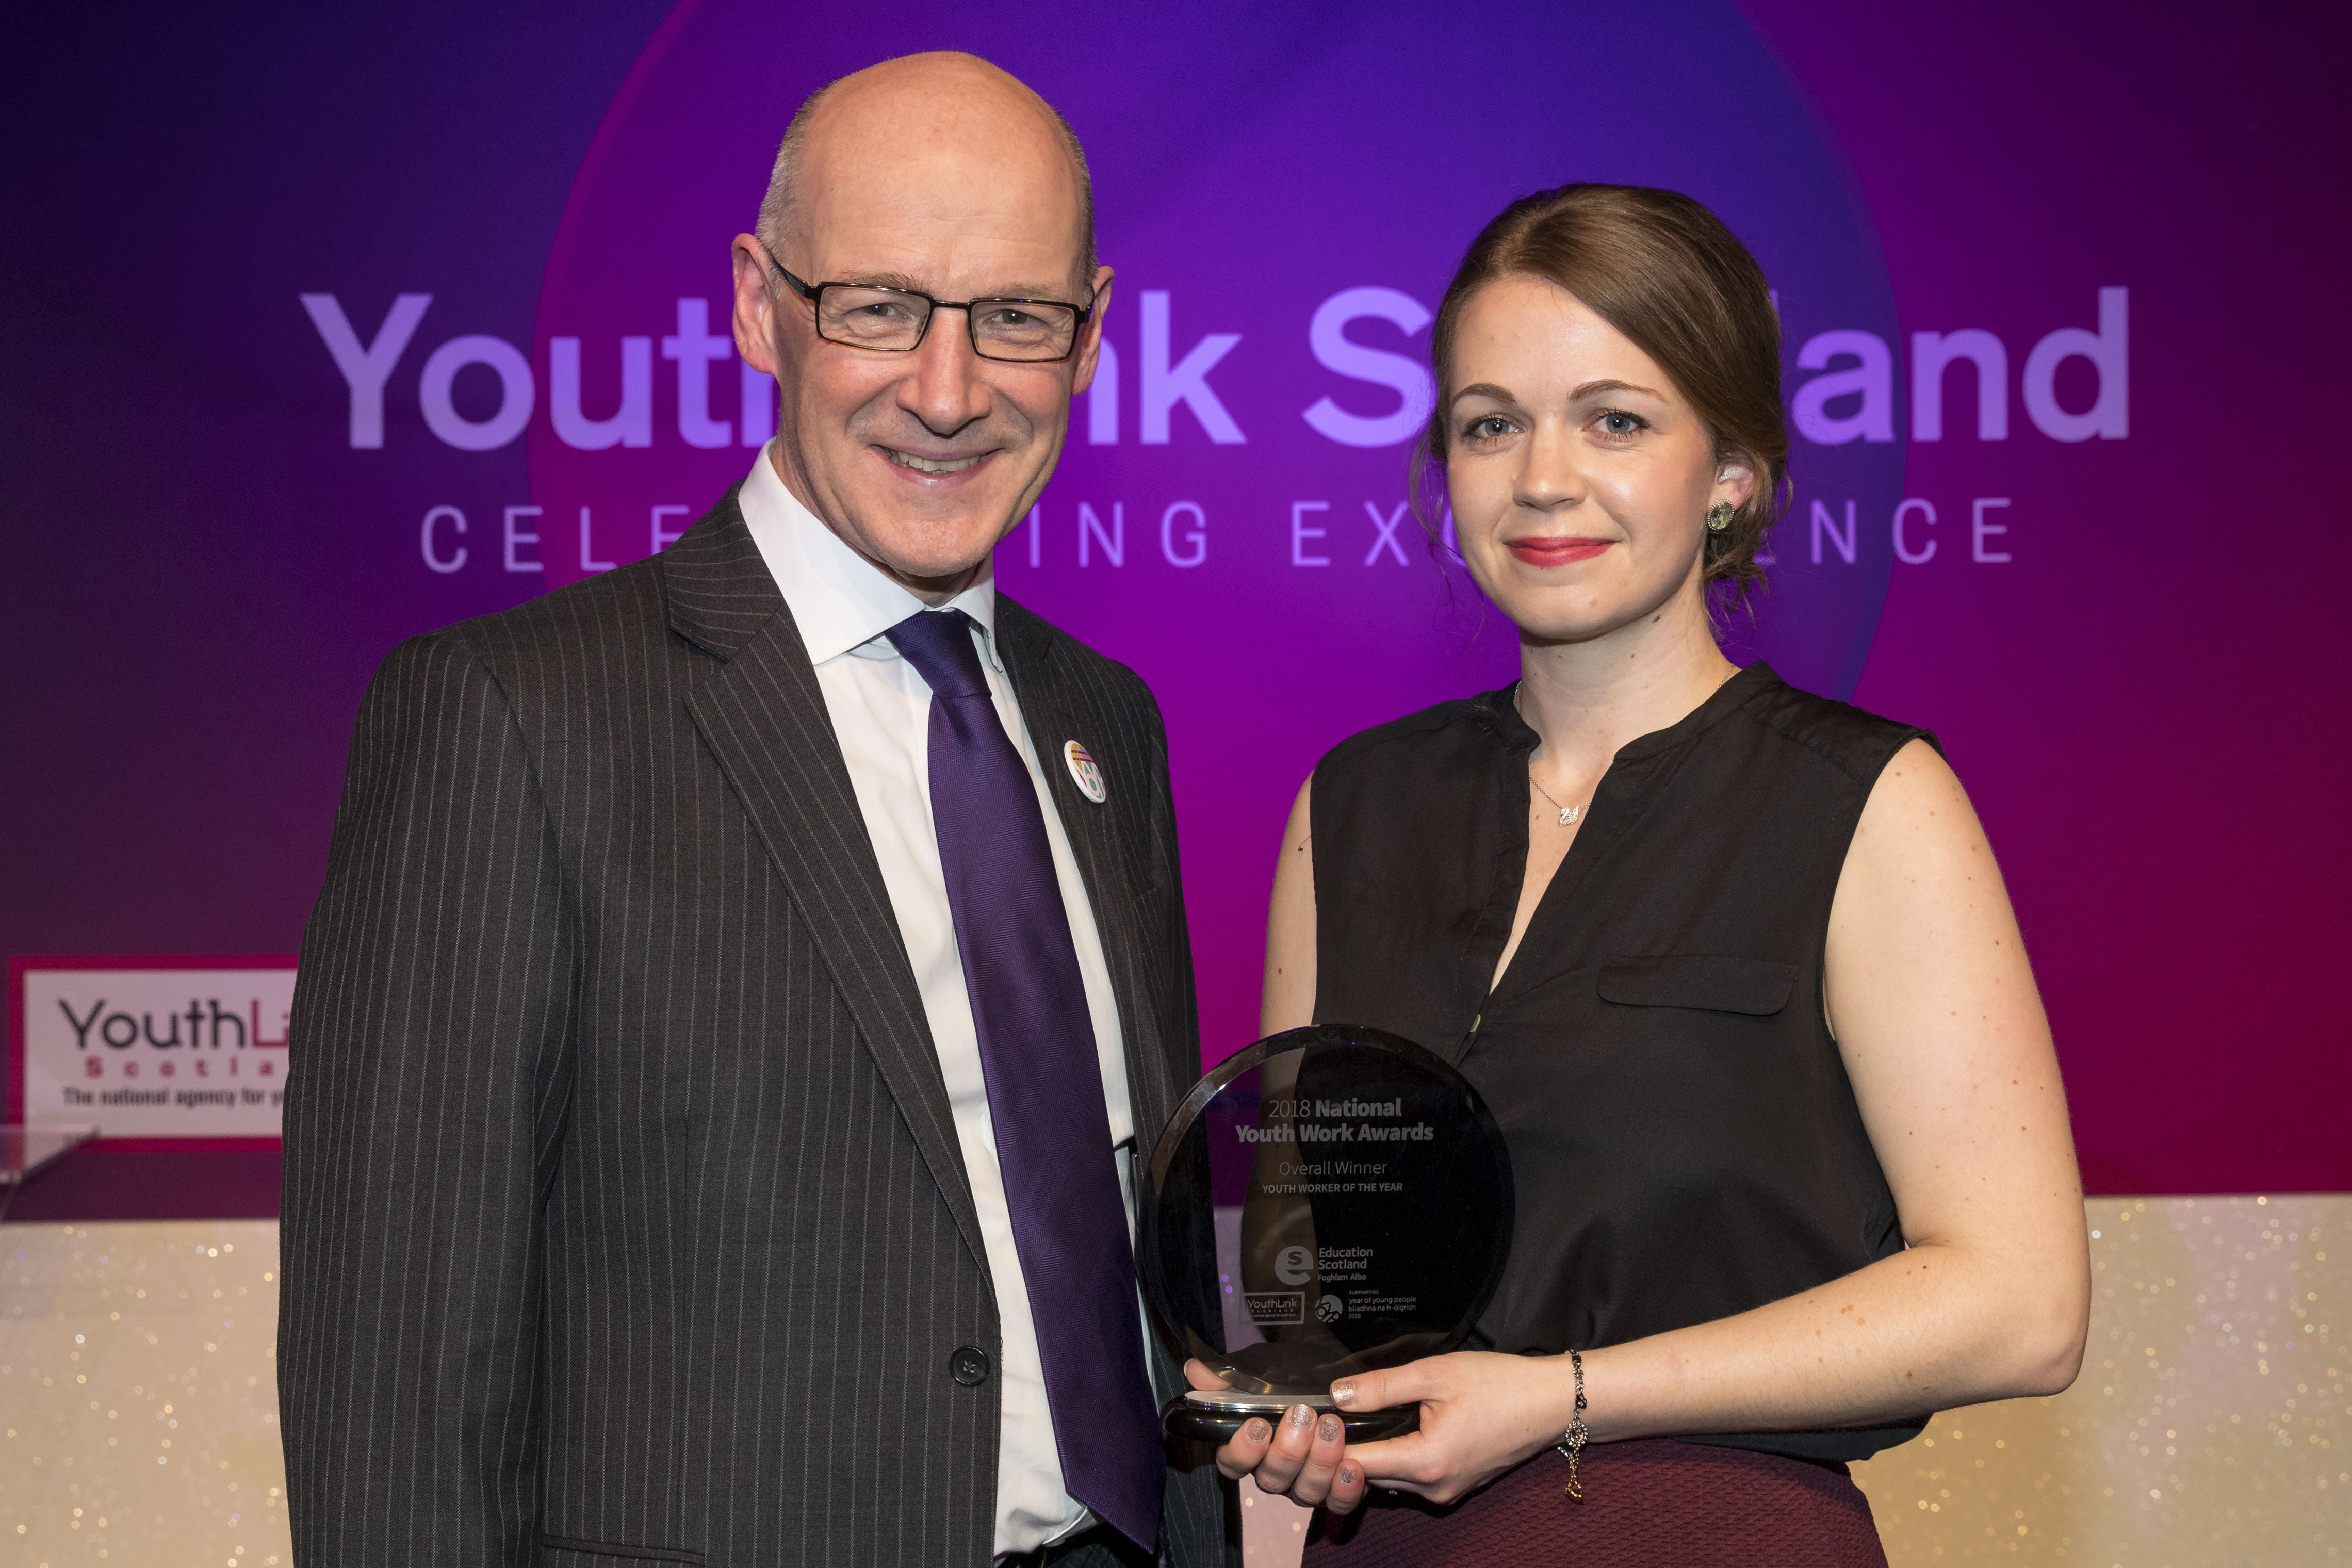 Deputy First Minister John Swinney and Matilda Lomas who has been named Scotland’s Youth Worker of the Year 2018 (Alan Rennie/YouthLink Scotland/PA)